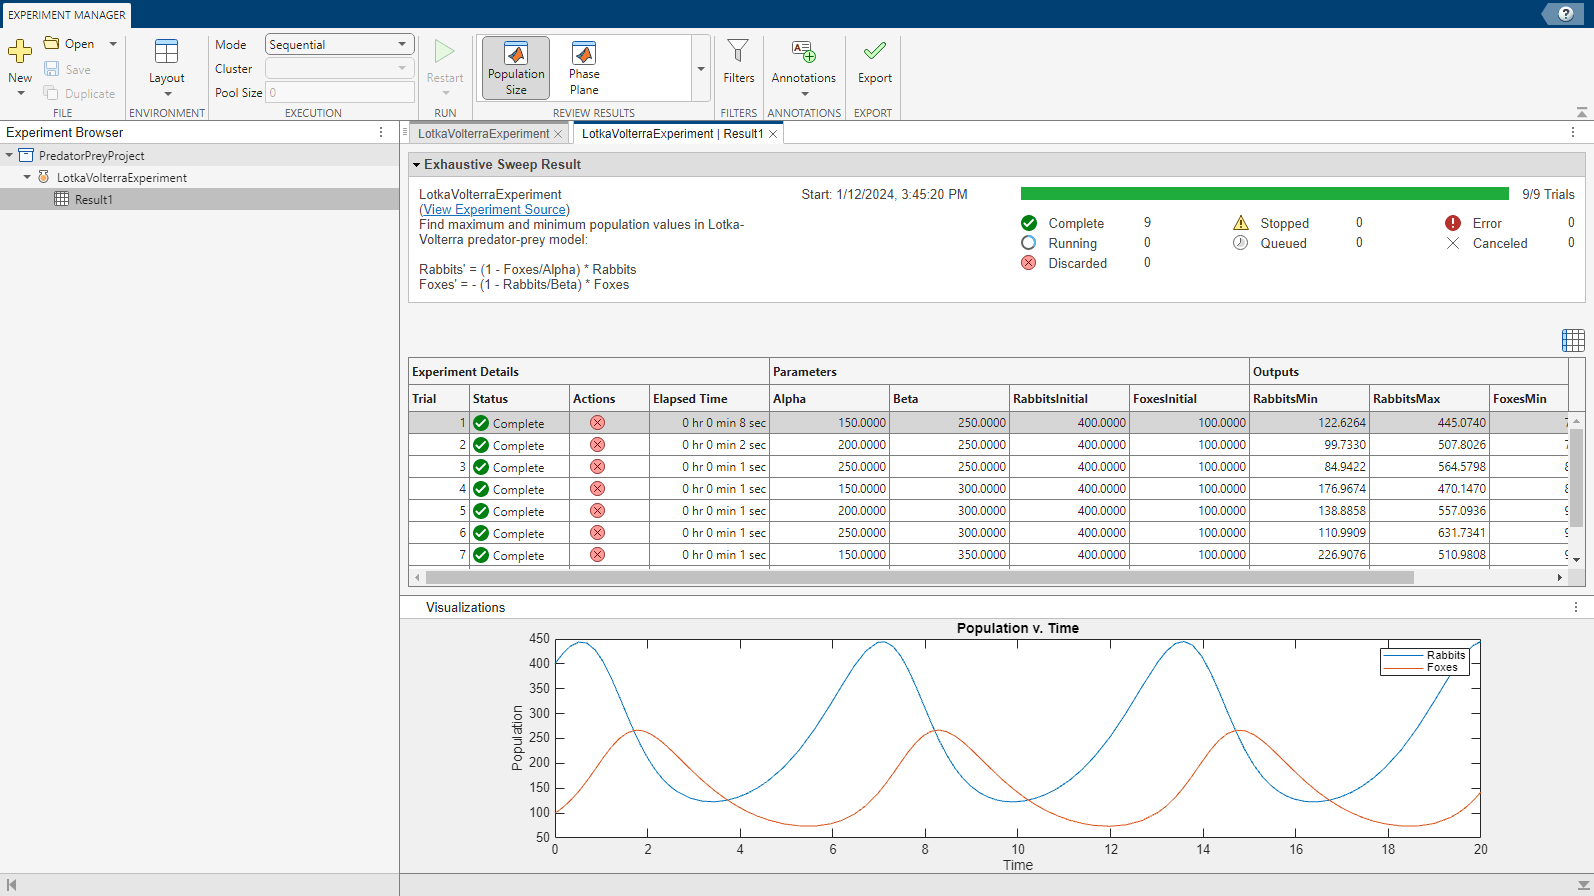 Experiment Manager app